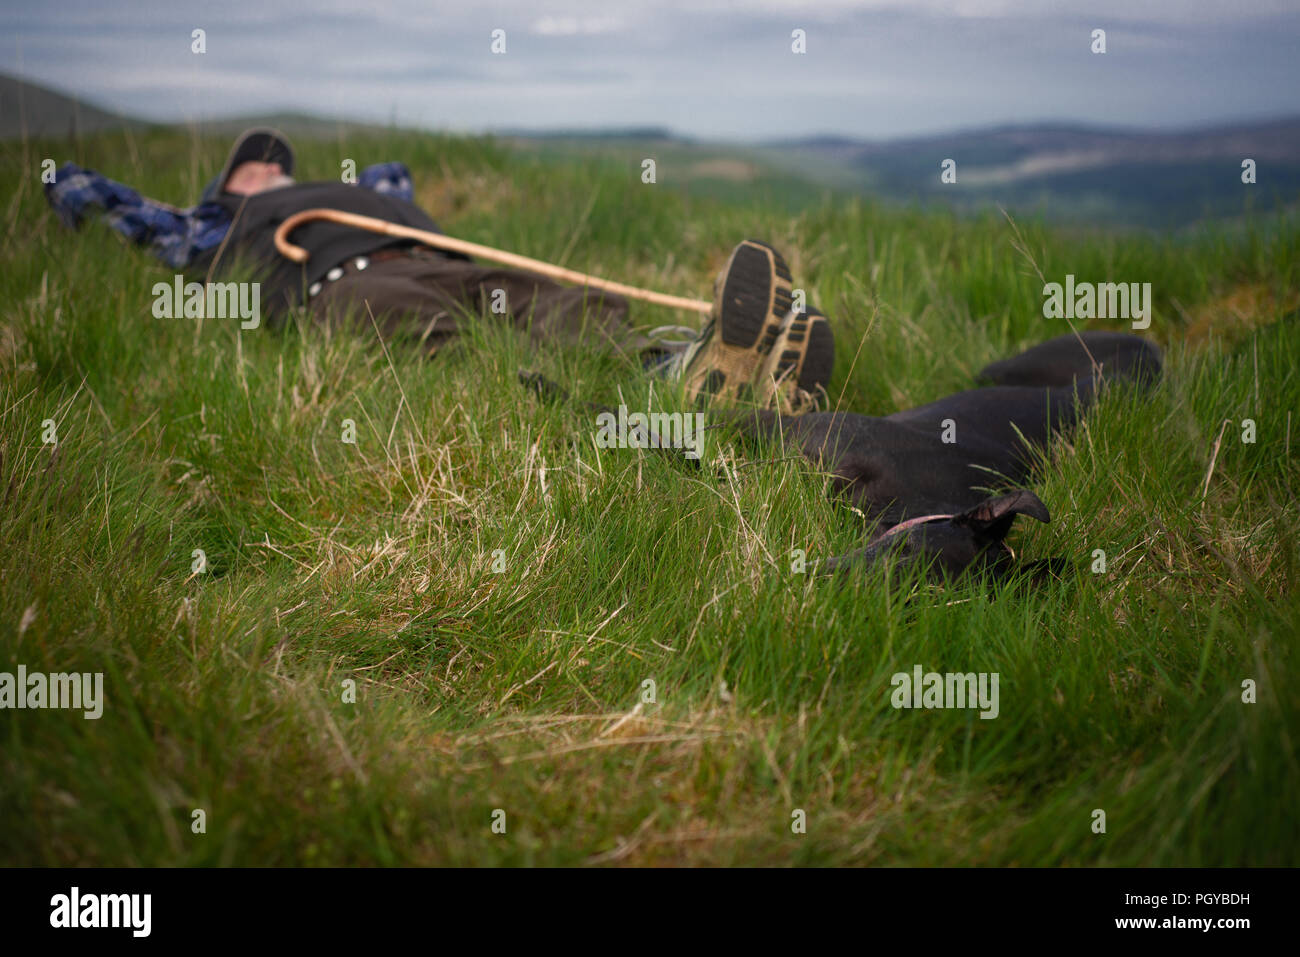 Senior Man and Dog Sleep in the Grass on a Hillside in Rural Scotland Stock Photo